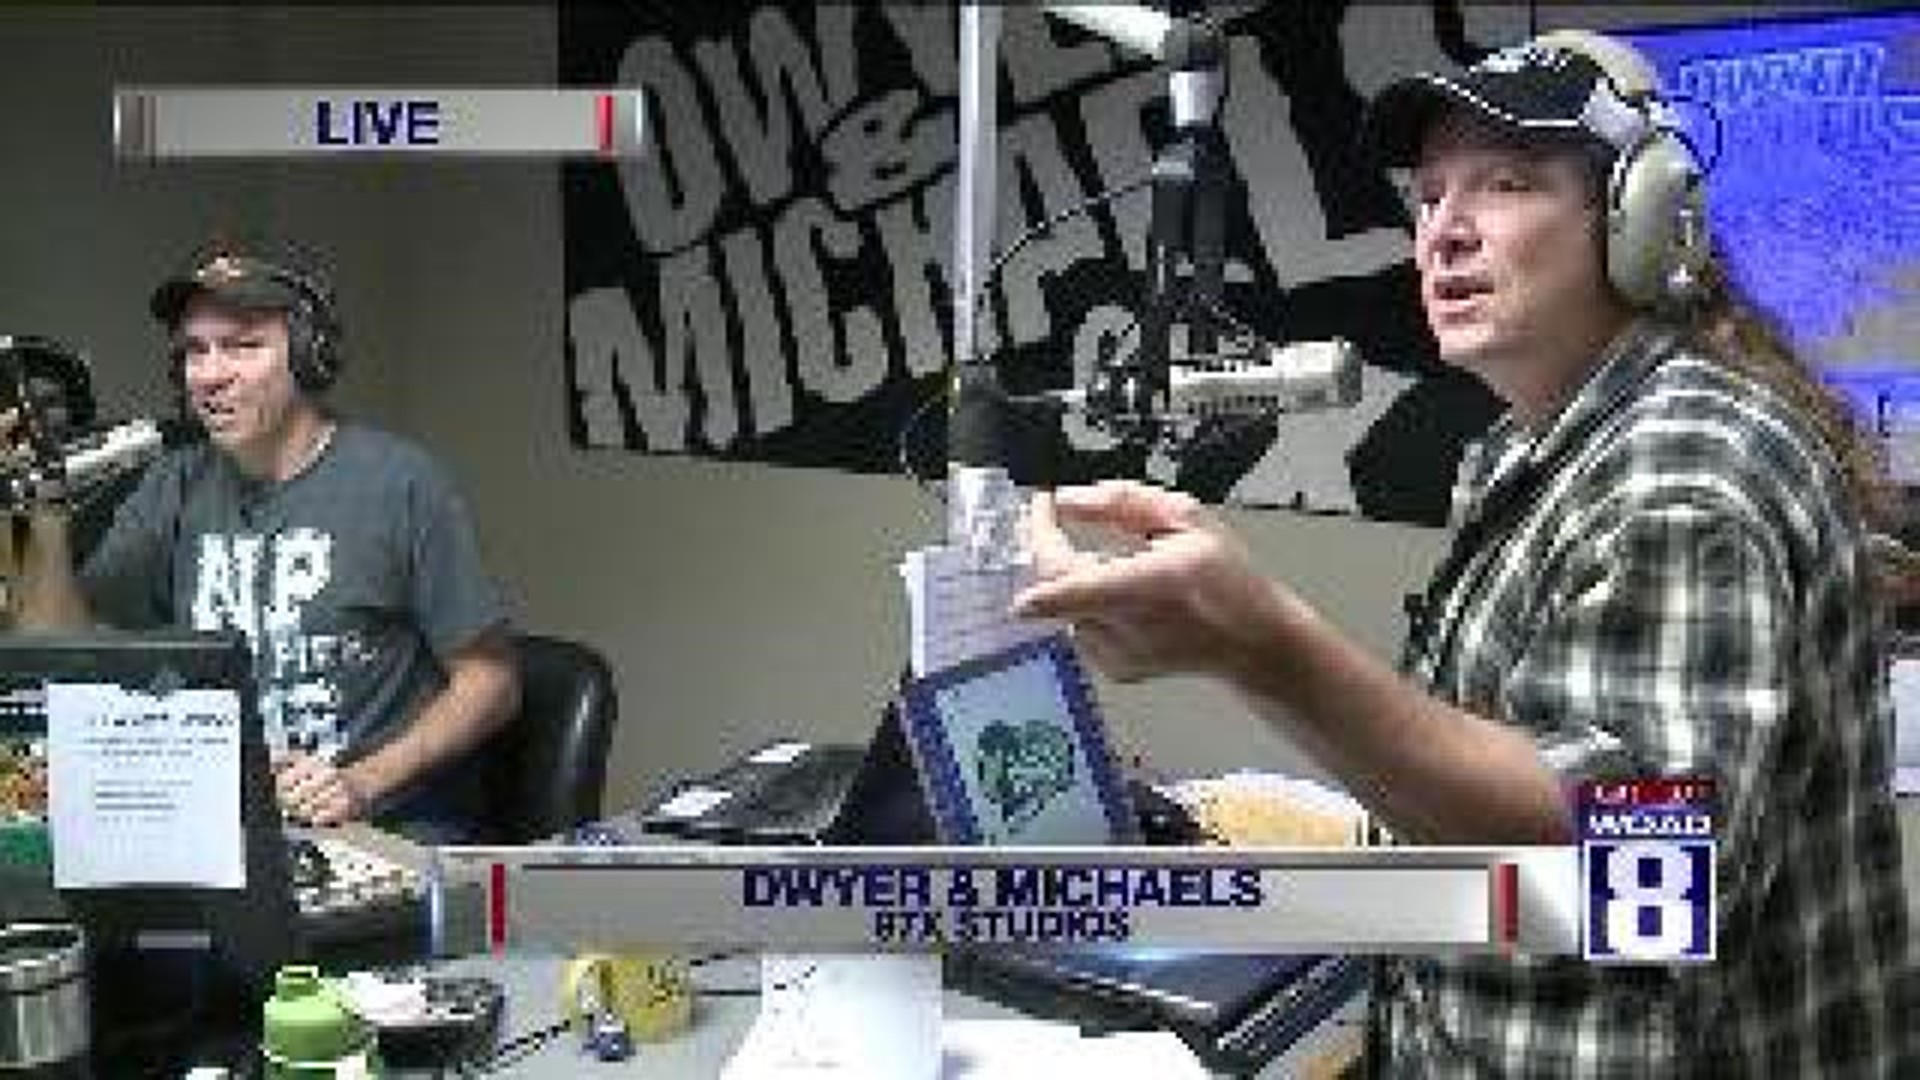 Dwyer and Michaels voted best morning radio show